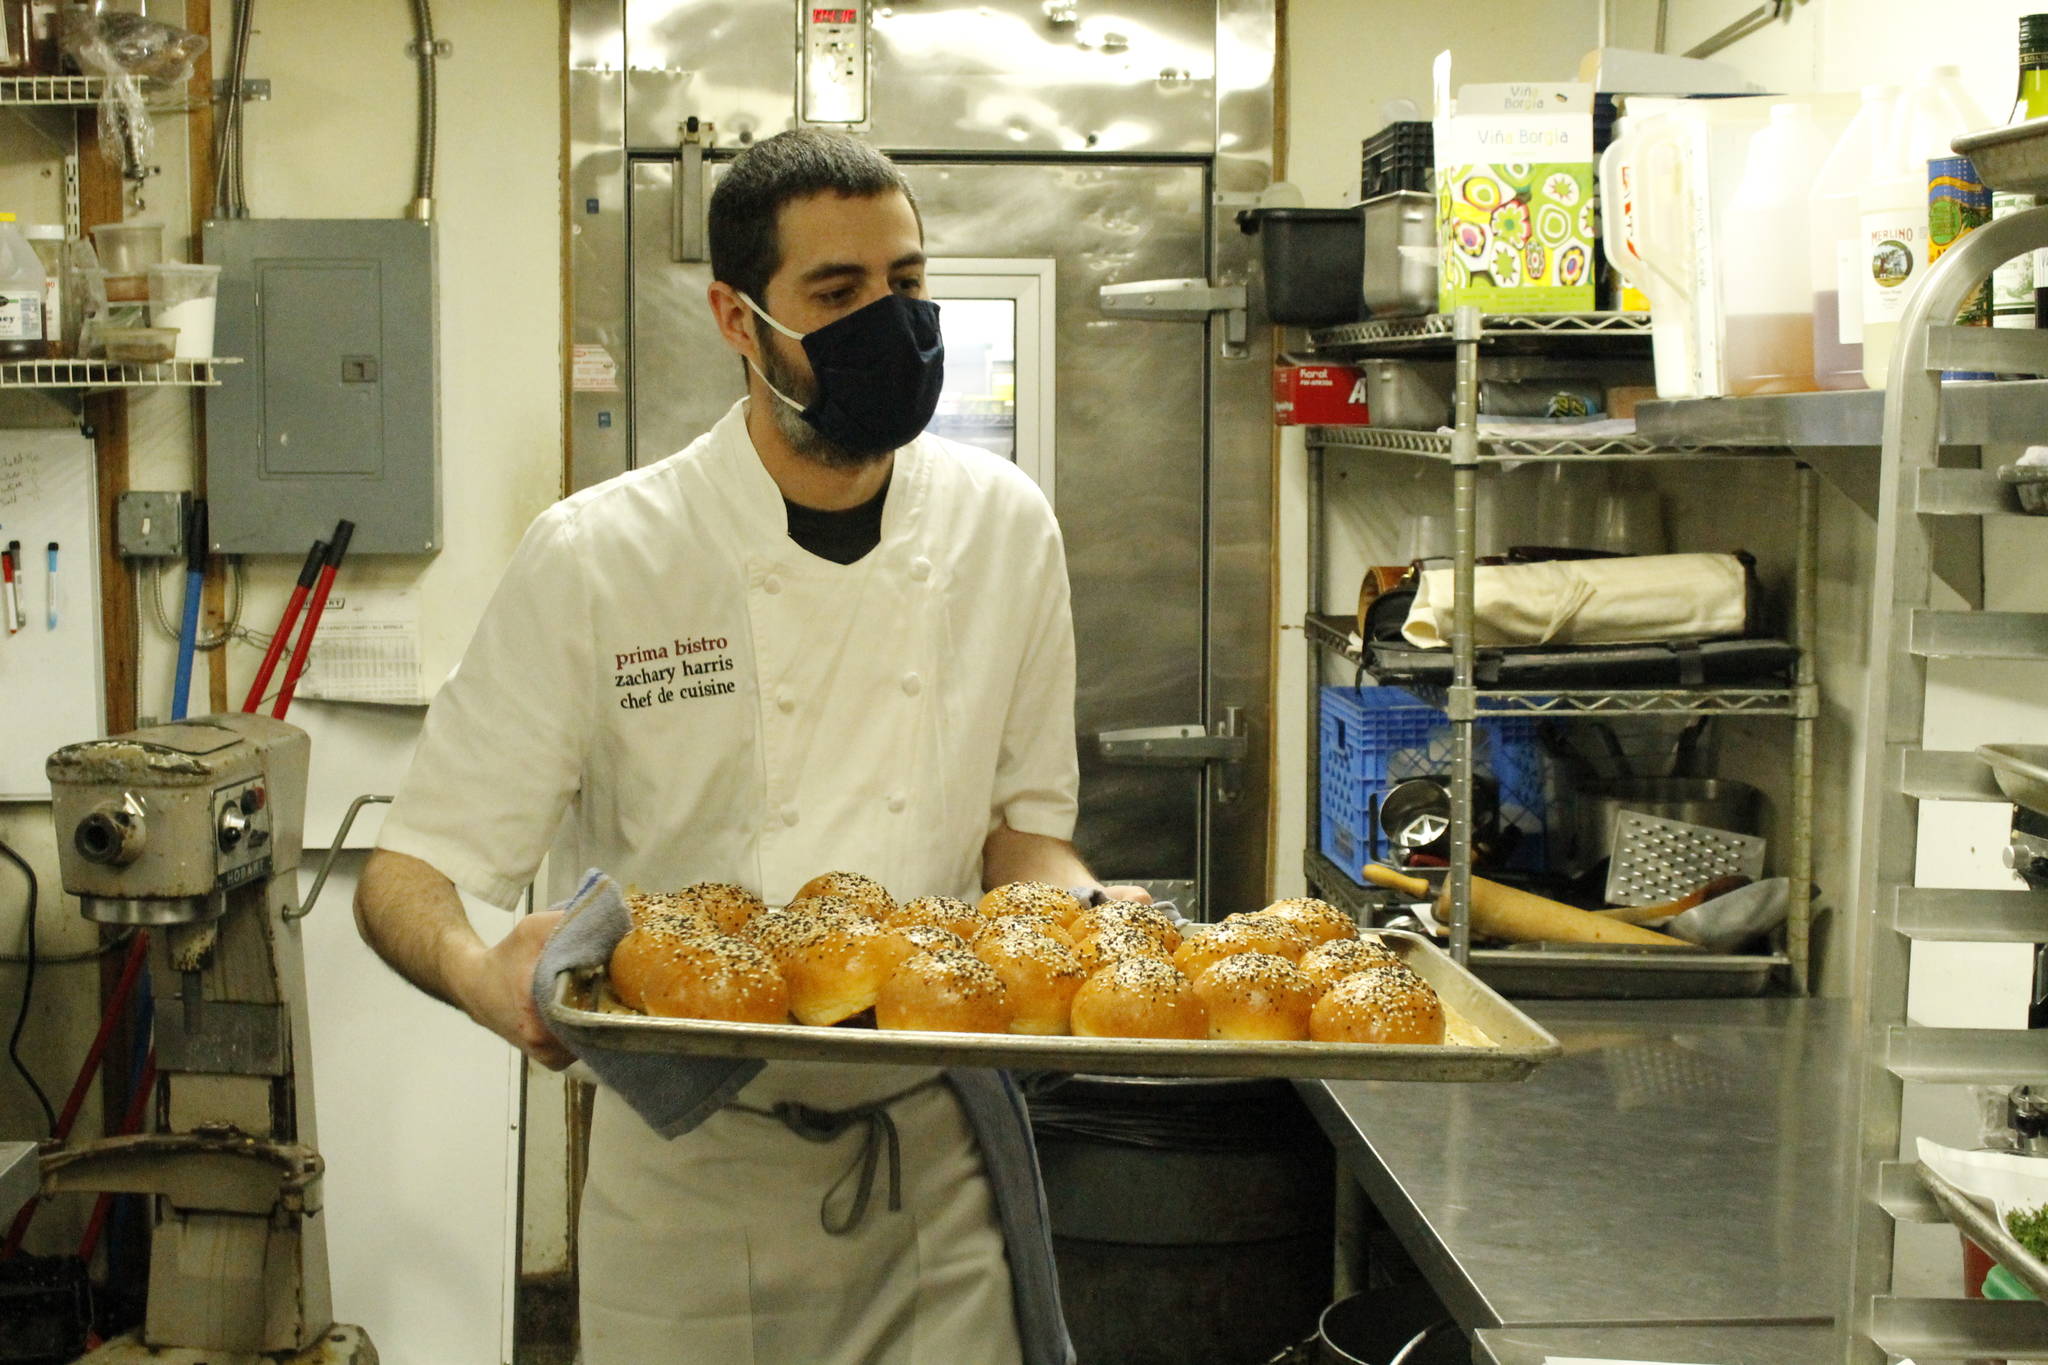 Head Chef Zachary Harris transports a pan of freshly baked buns in Prima Bistro’s kitchen. The Langley restaurant, like many other businesses on Whidbey, is looking for more staff as the spring season ramps up. Photo by Kira Erickson/Whidbey News Group